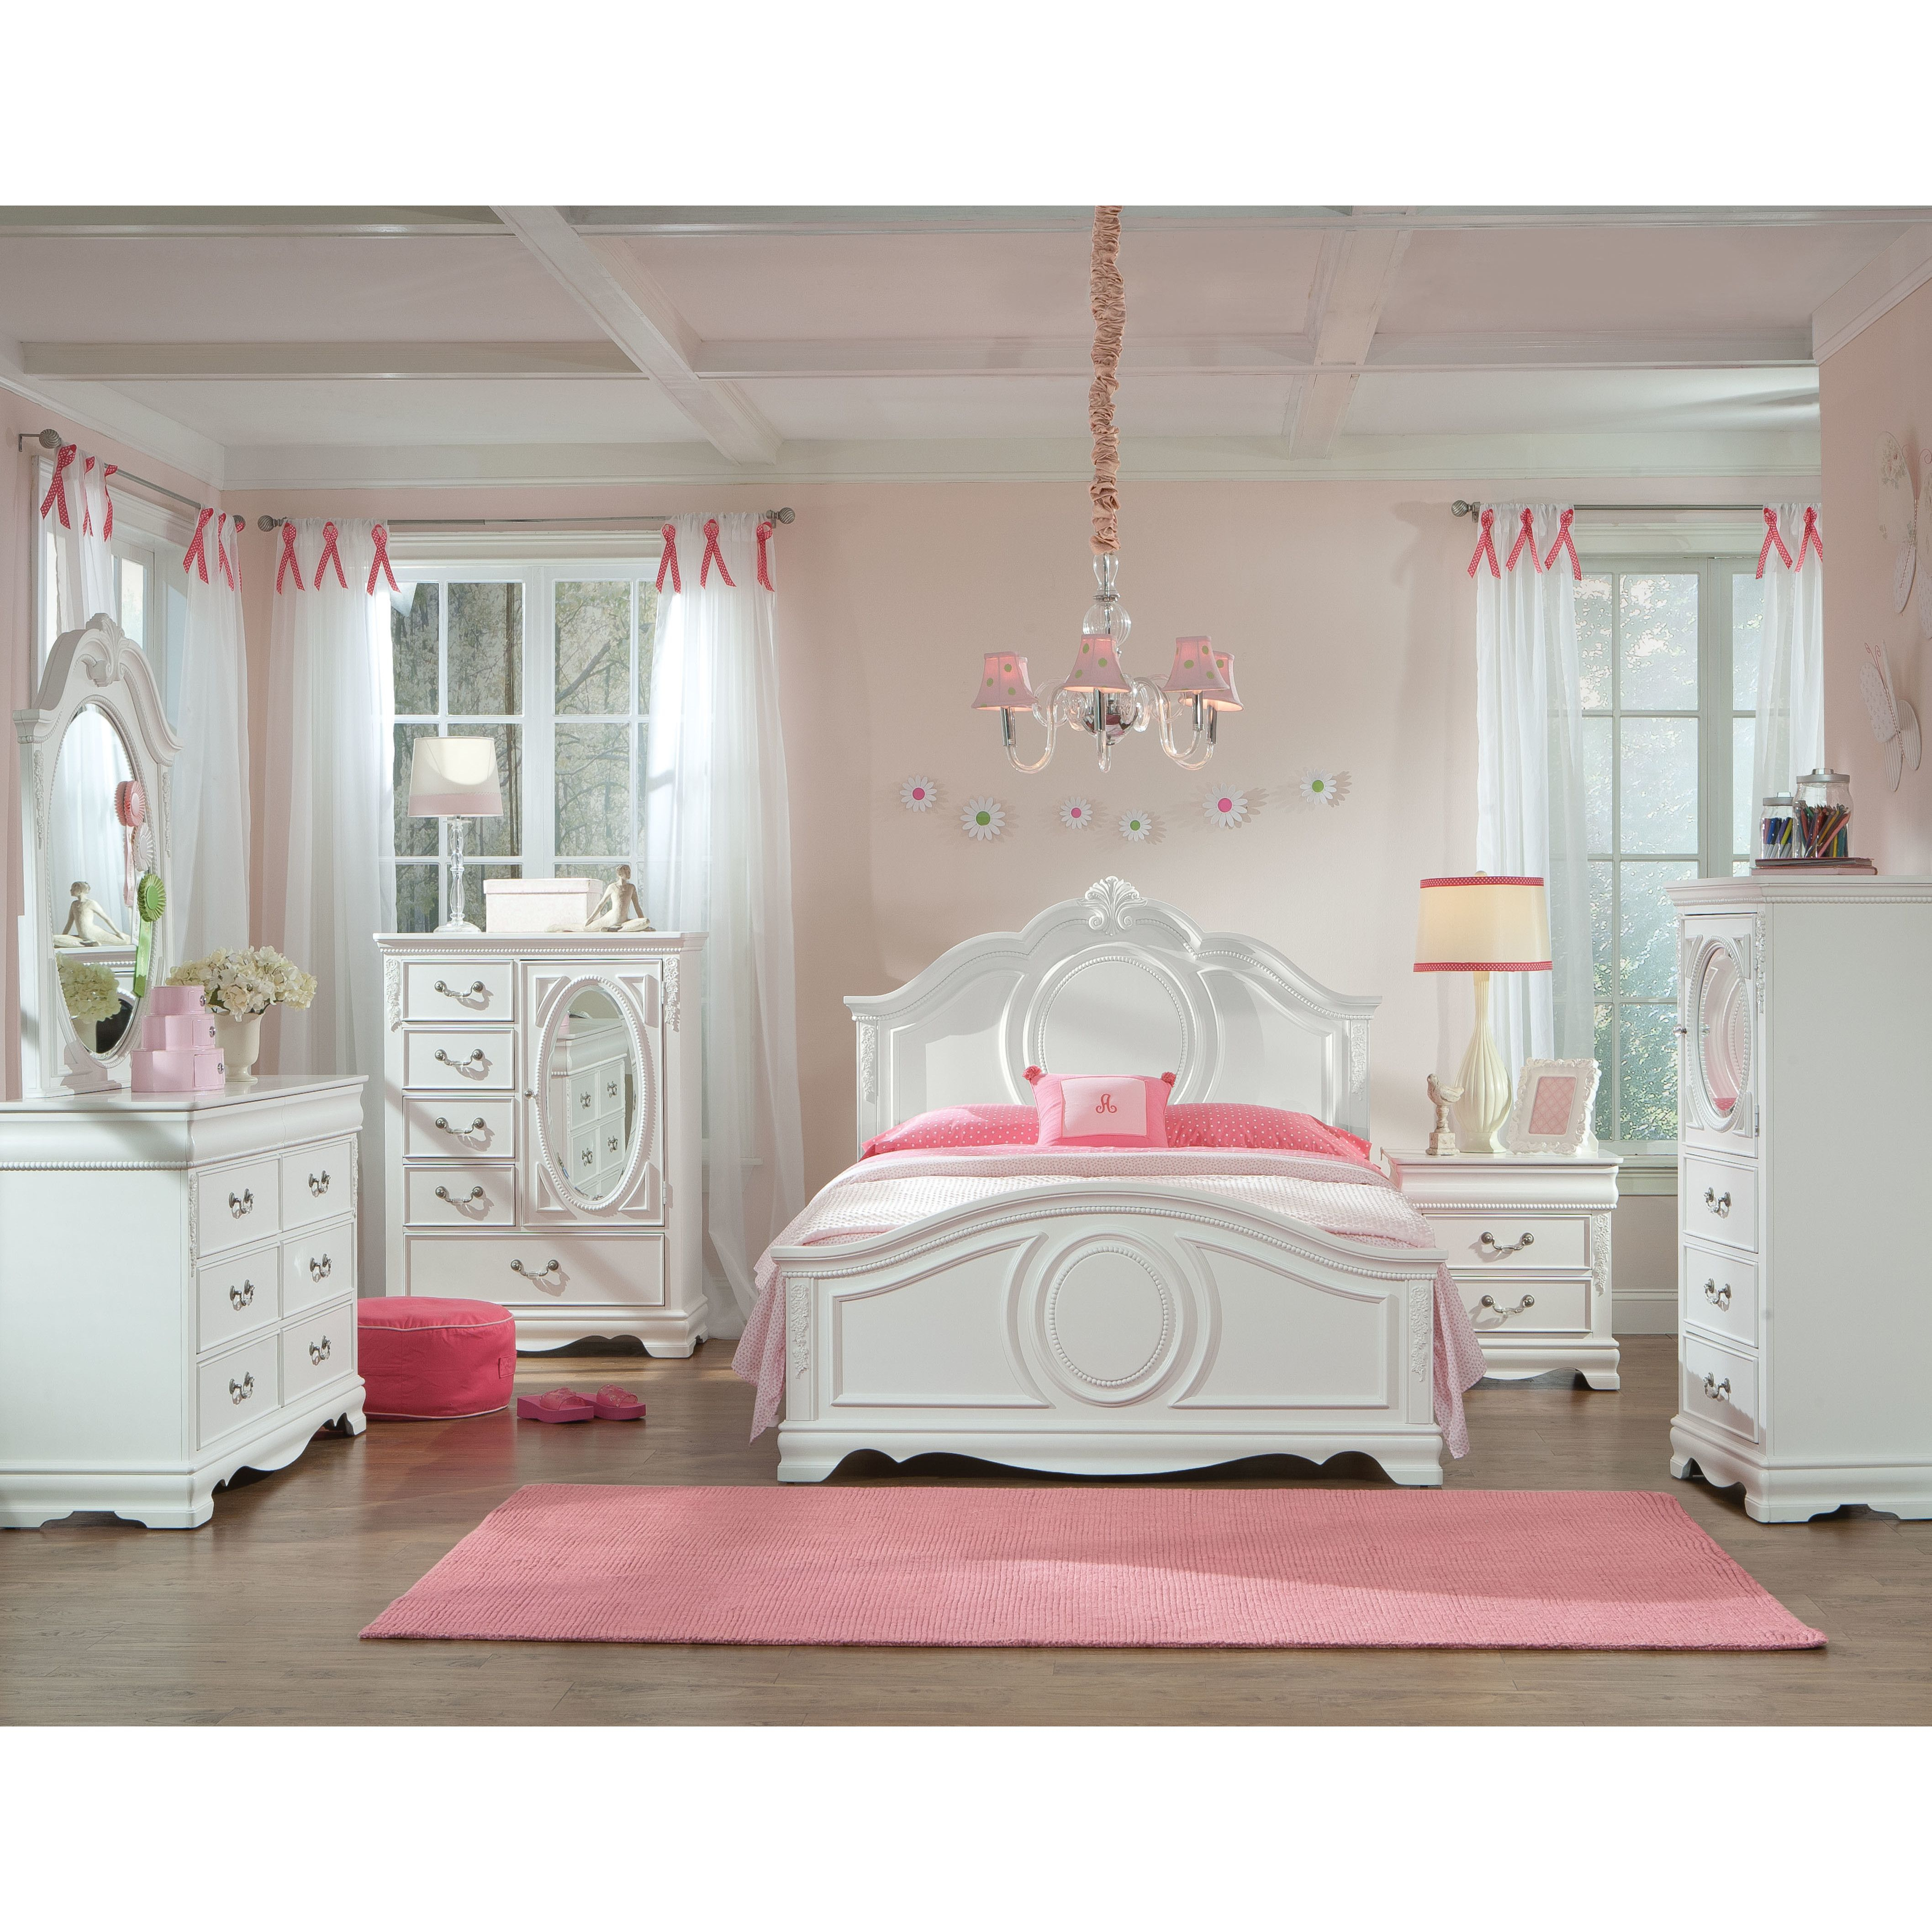 Incredible Brilliant Full Bedroom Sets For Girls Learning Tower With for dimensions 4230 X 4230